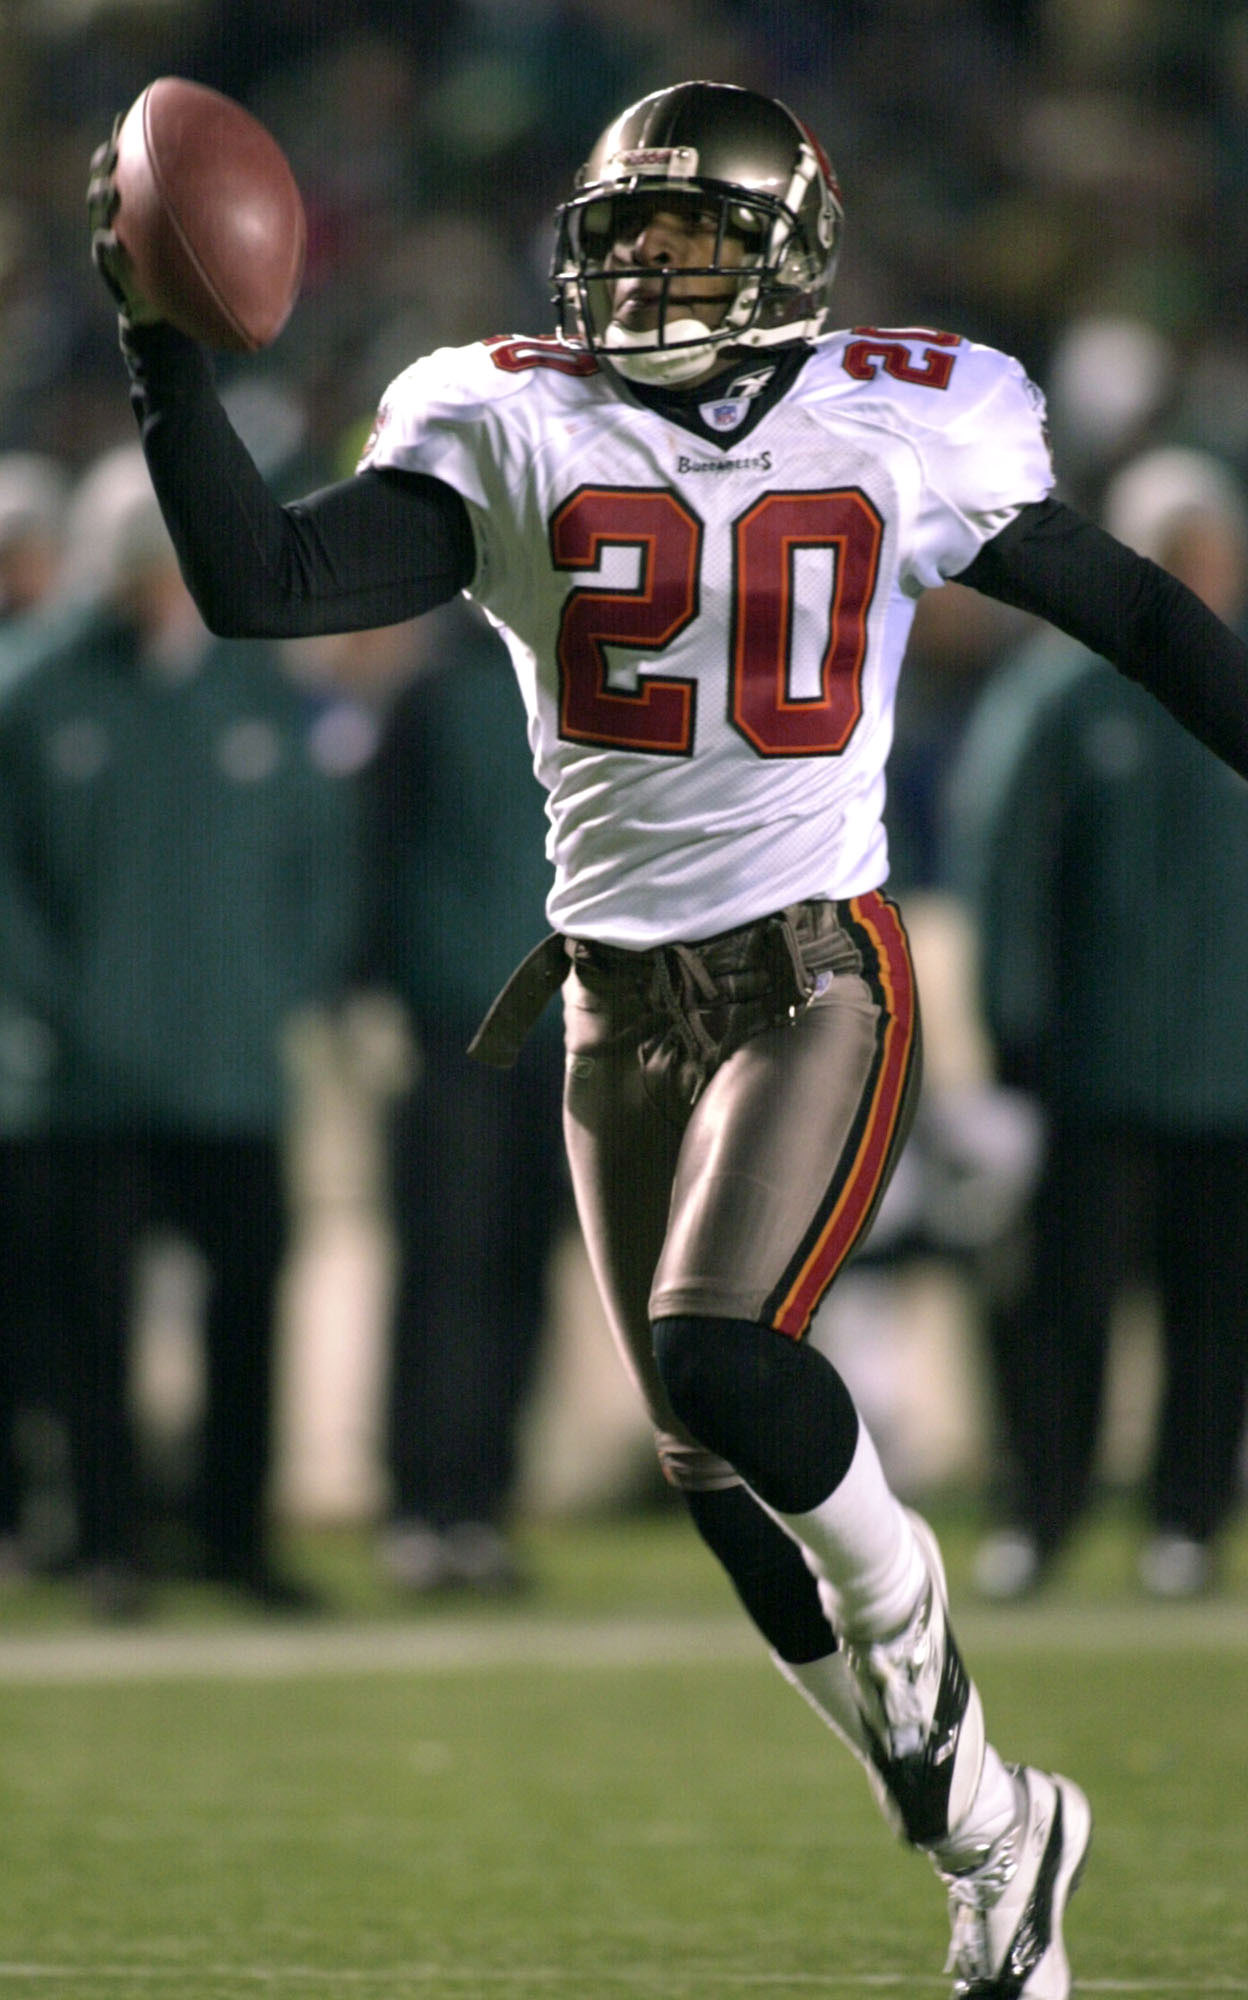 An Absolute Stunner! (Buccaneers vs. Eagles 2002, NFC Championship